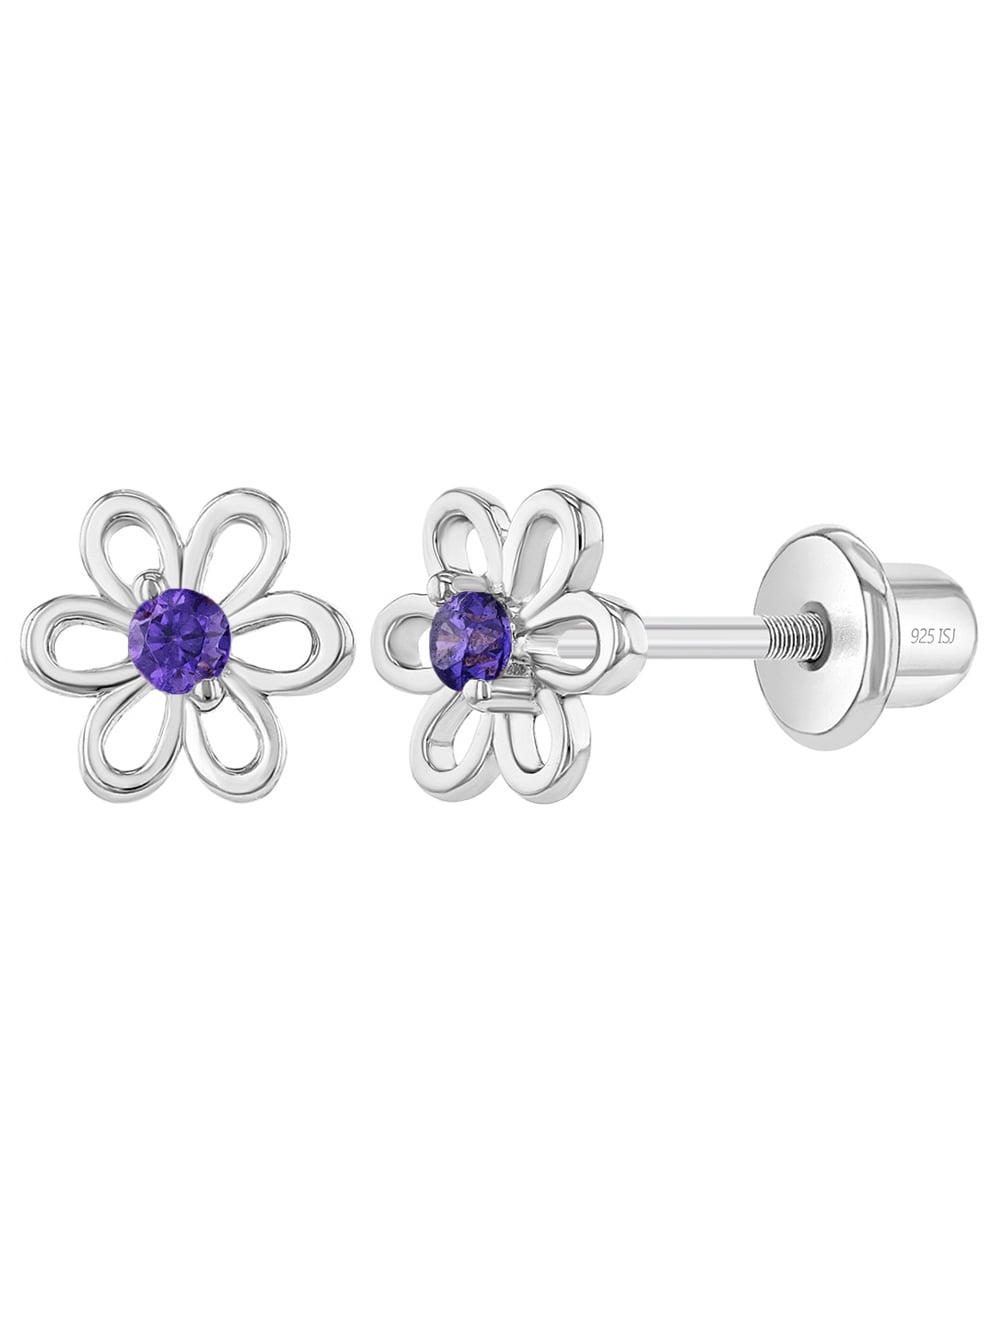 Details about   18k Gold Plated Purple White Crystal Flower Girls Screw Back Earrings 5mm 